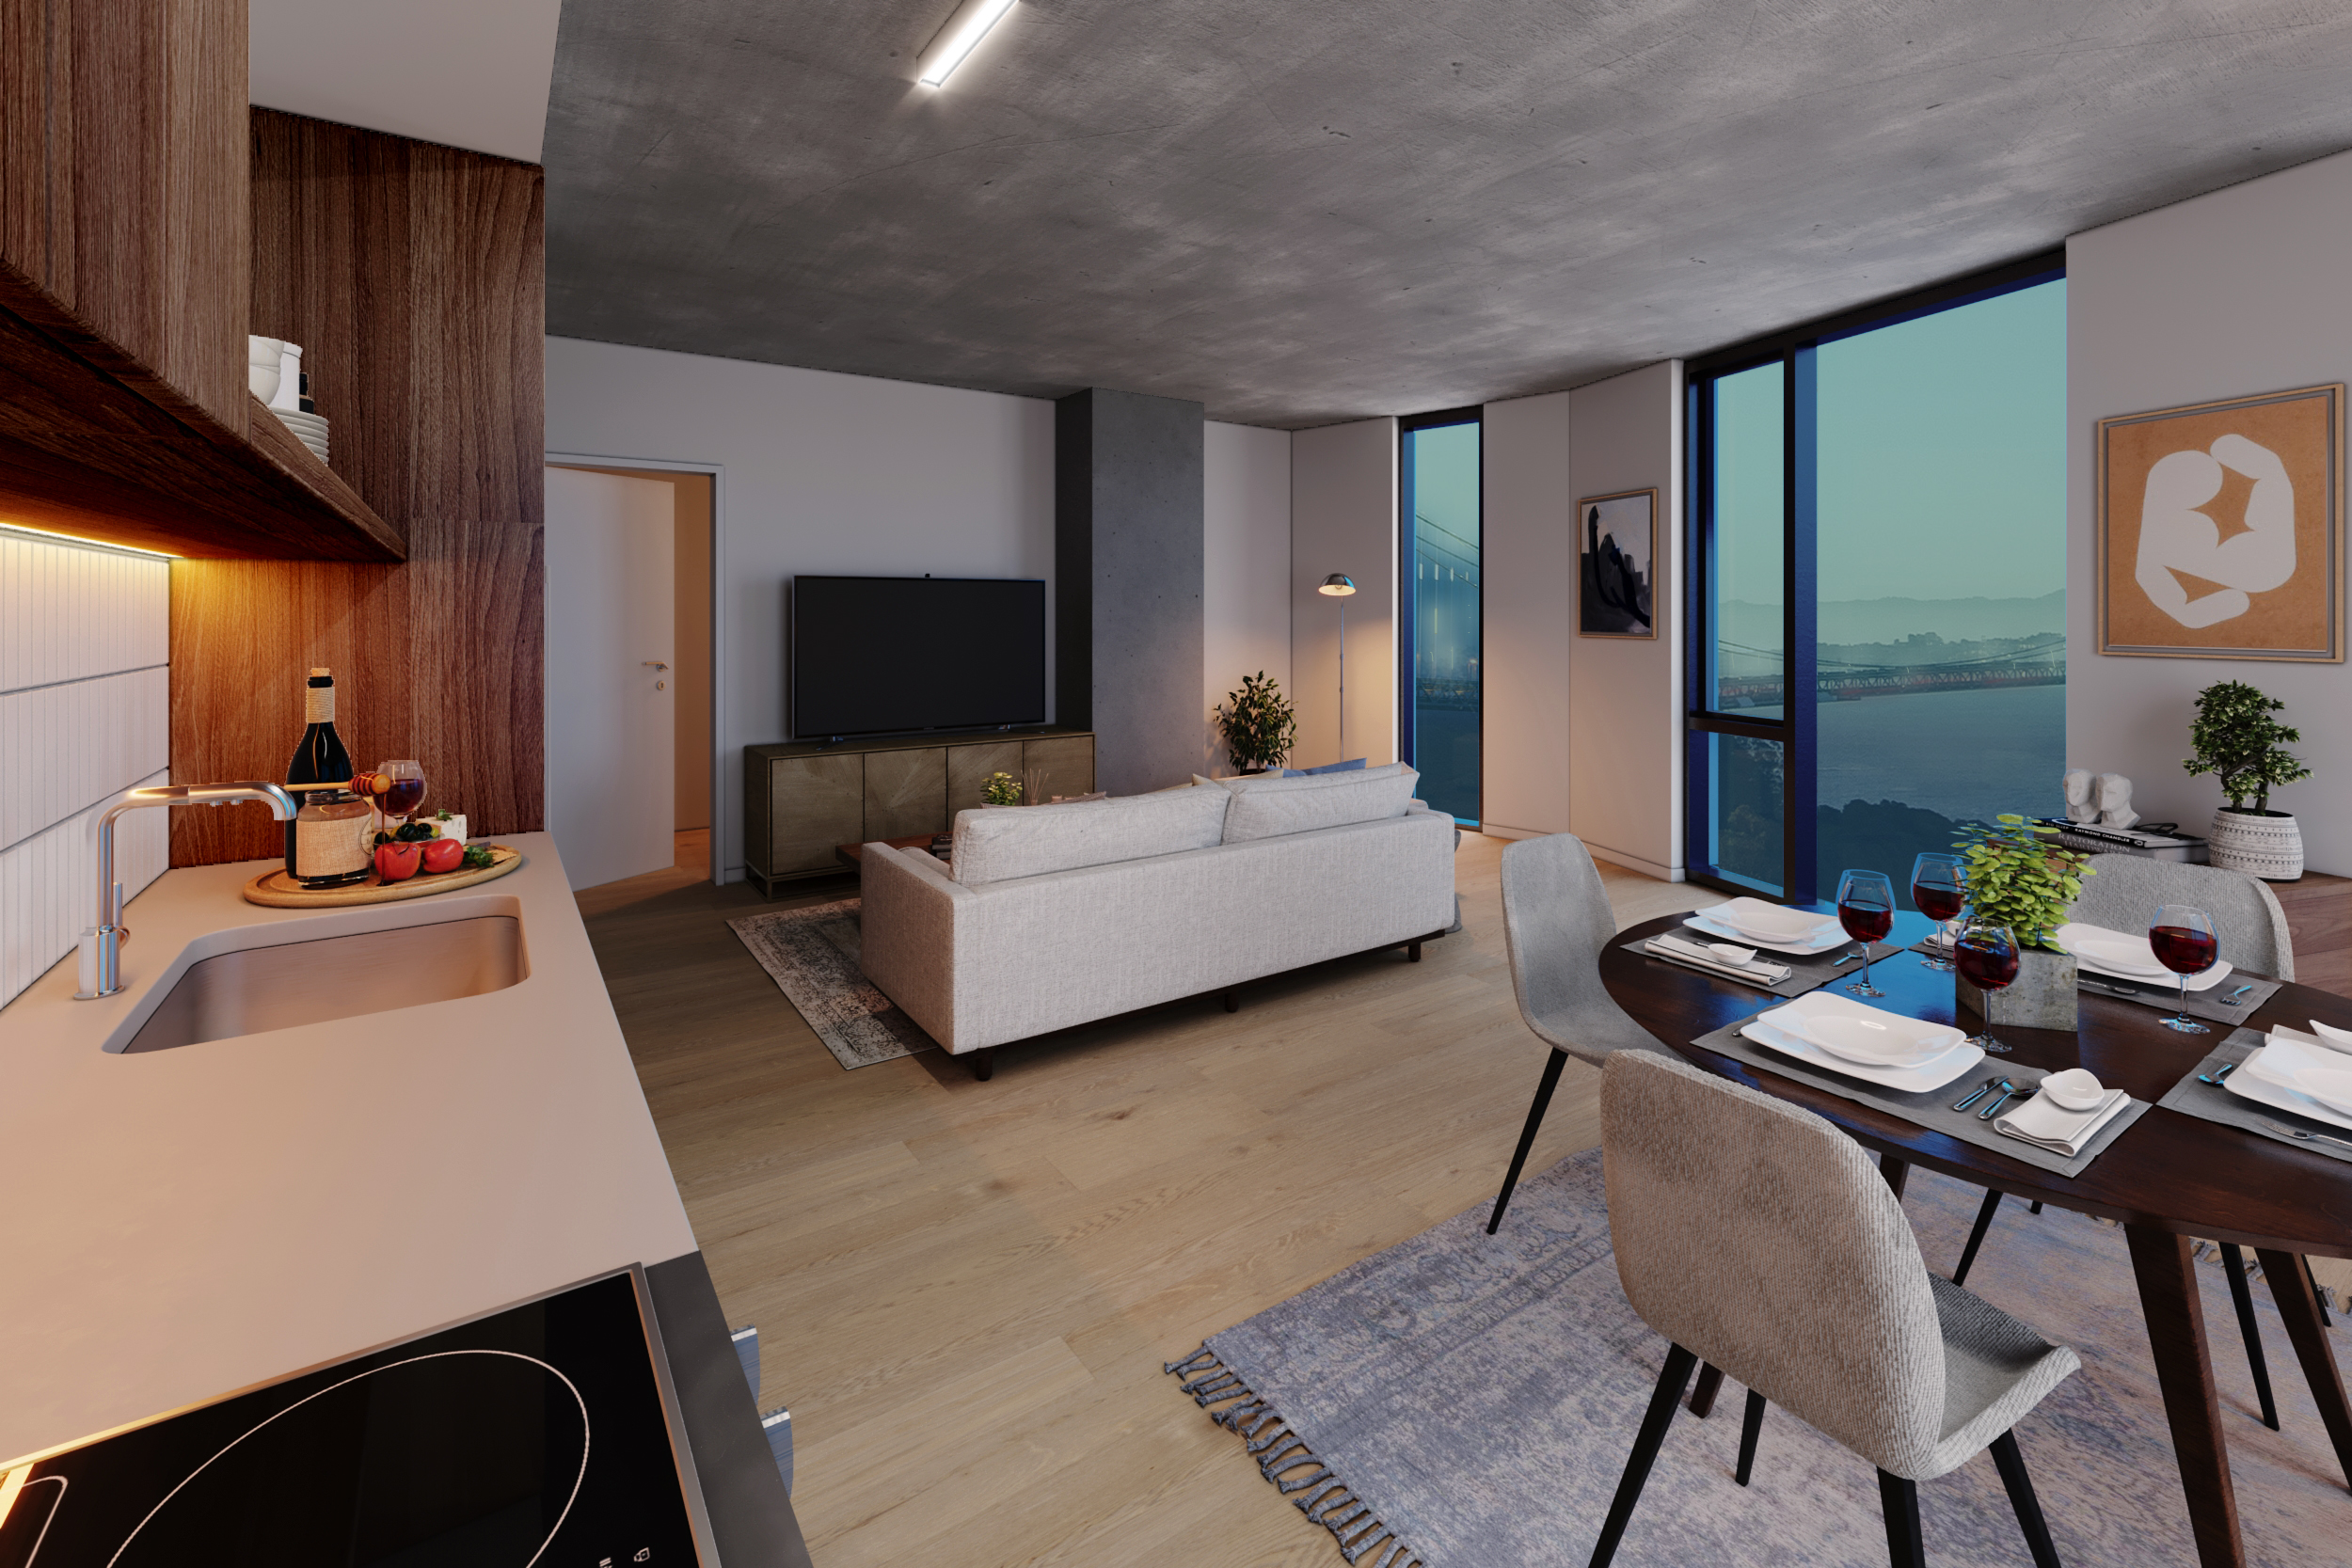 Rendering of a unit living room and kitchen with the view of the bay at night for Tidal House in Treasure Island, San Francisco, Ca.